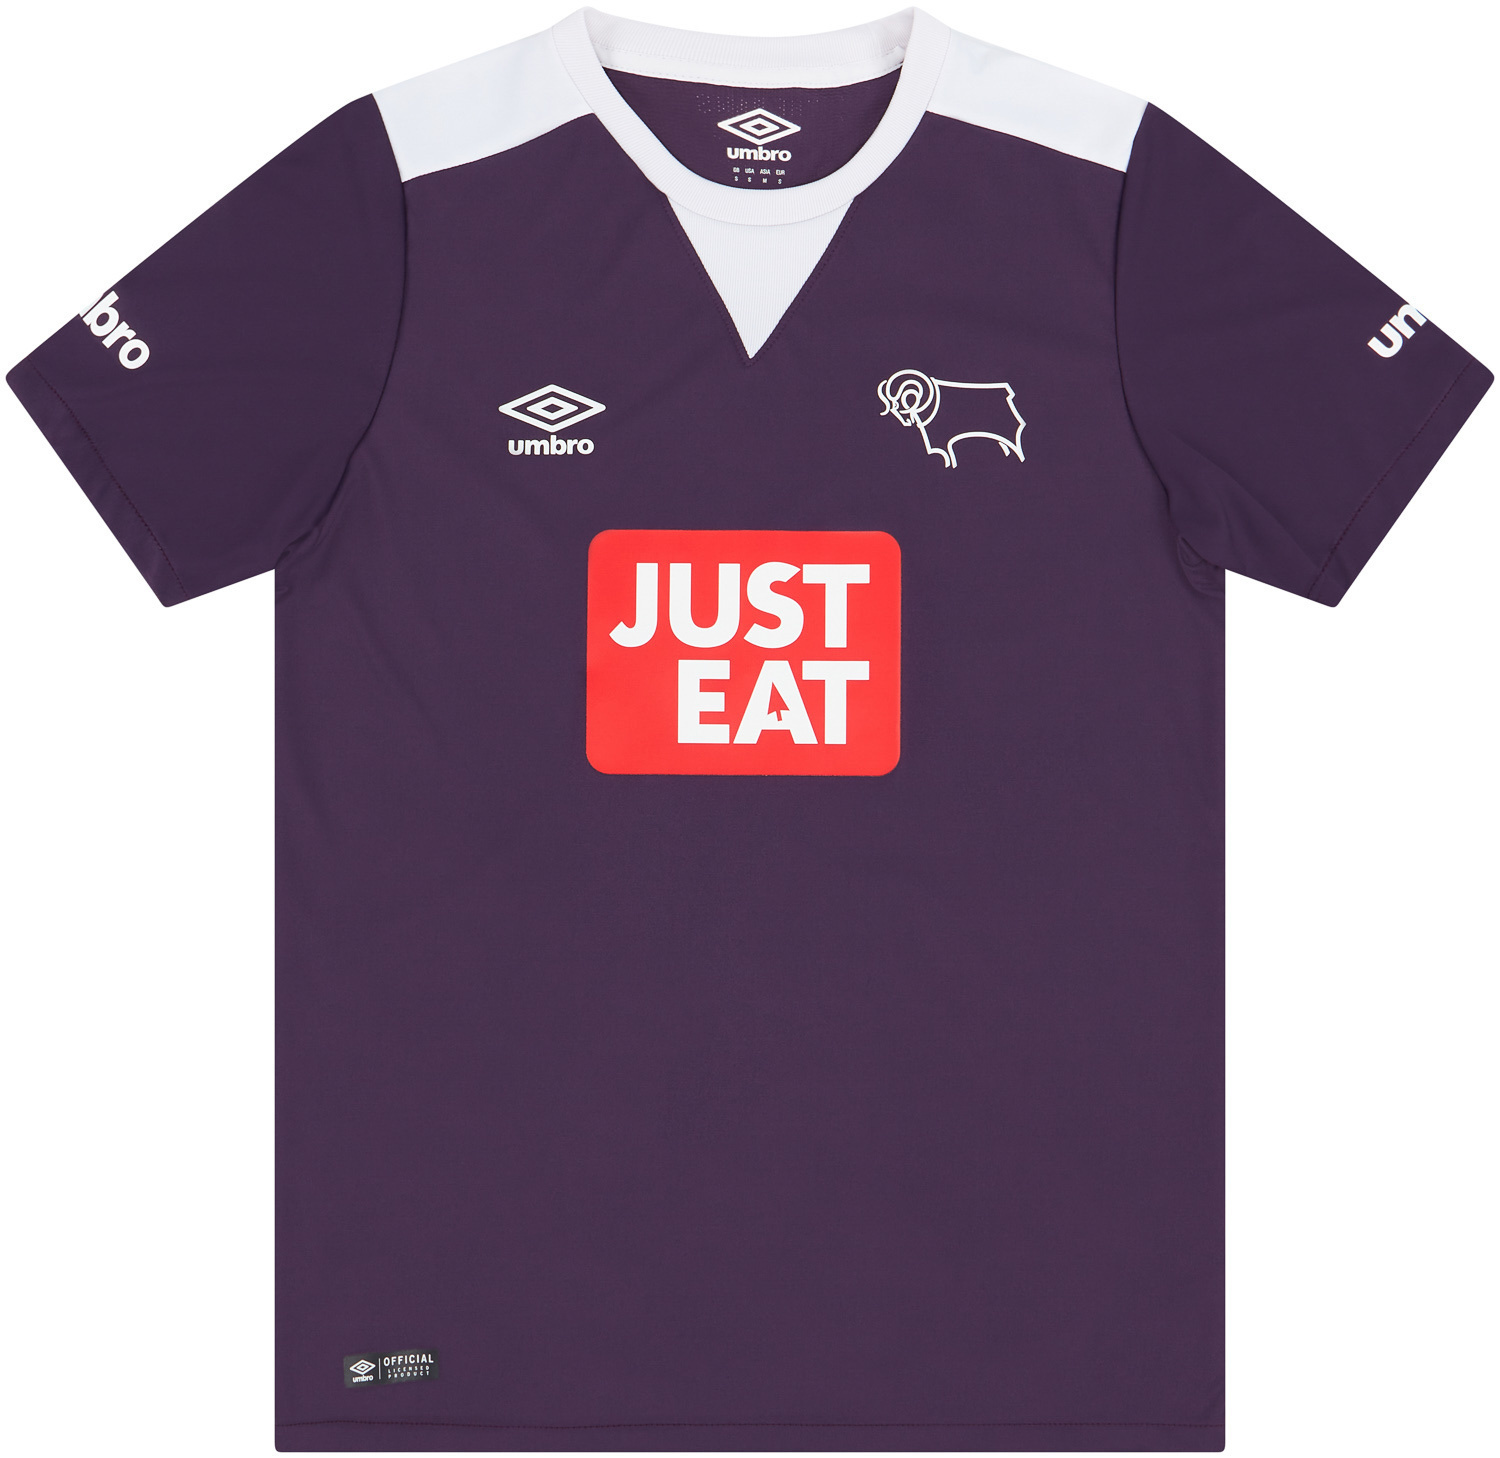 2015-16 Derby County Away Shirt - 8/10 - ()